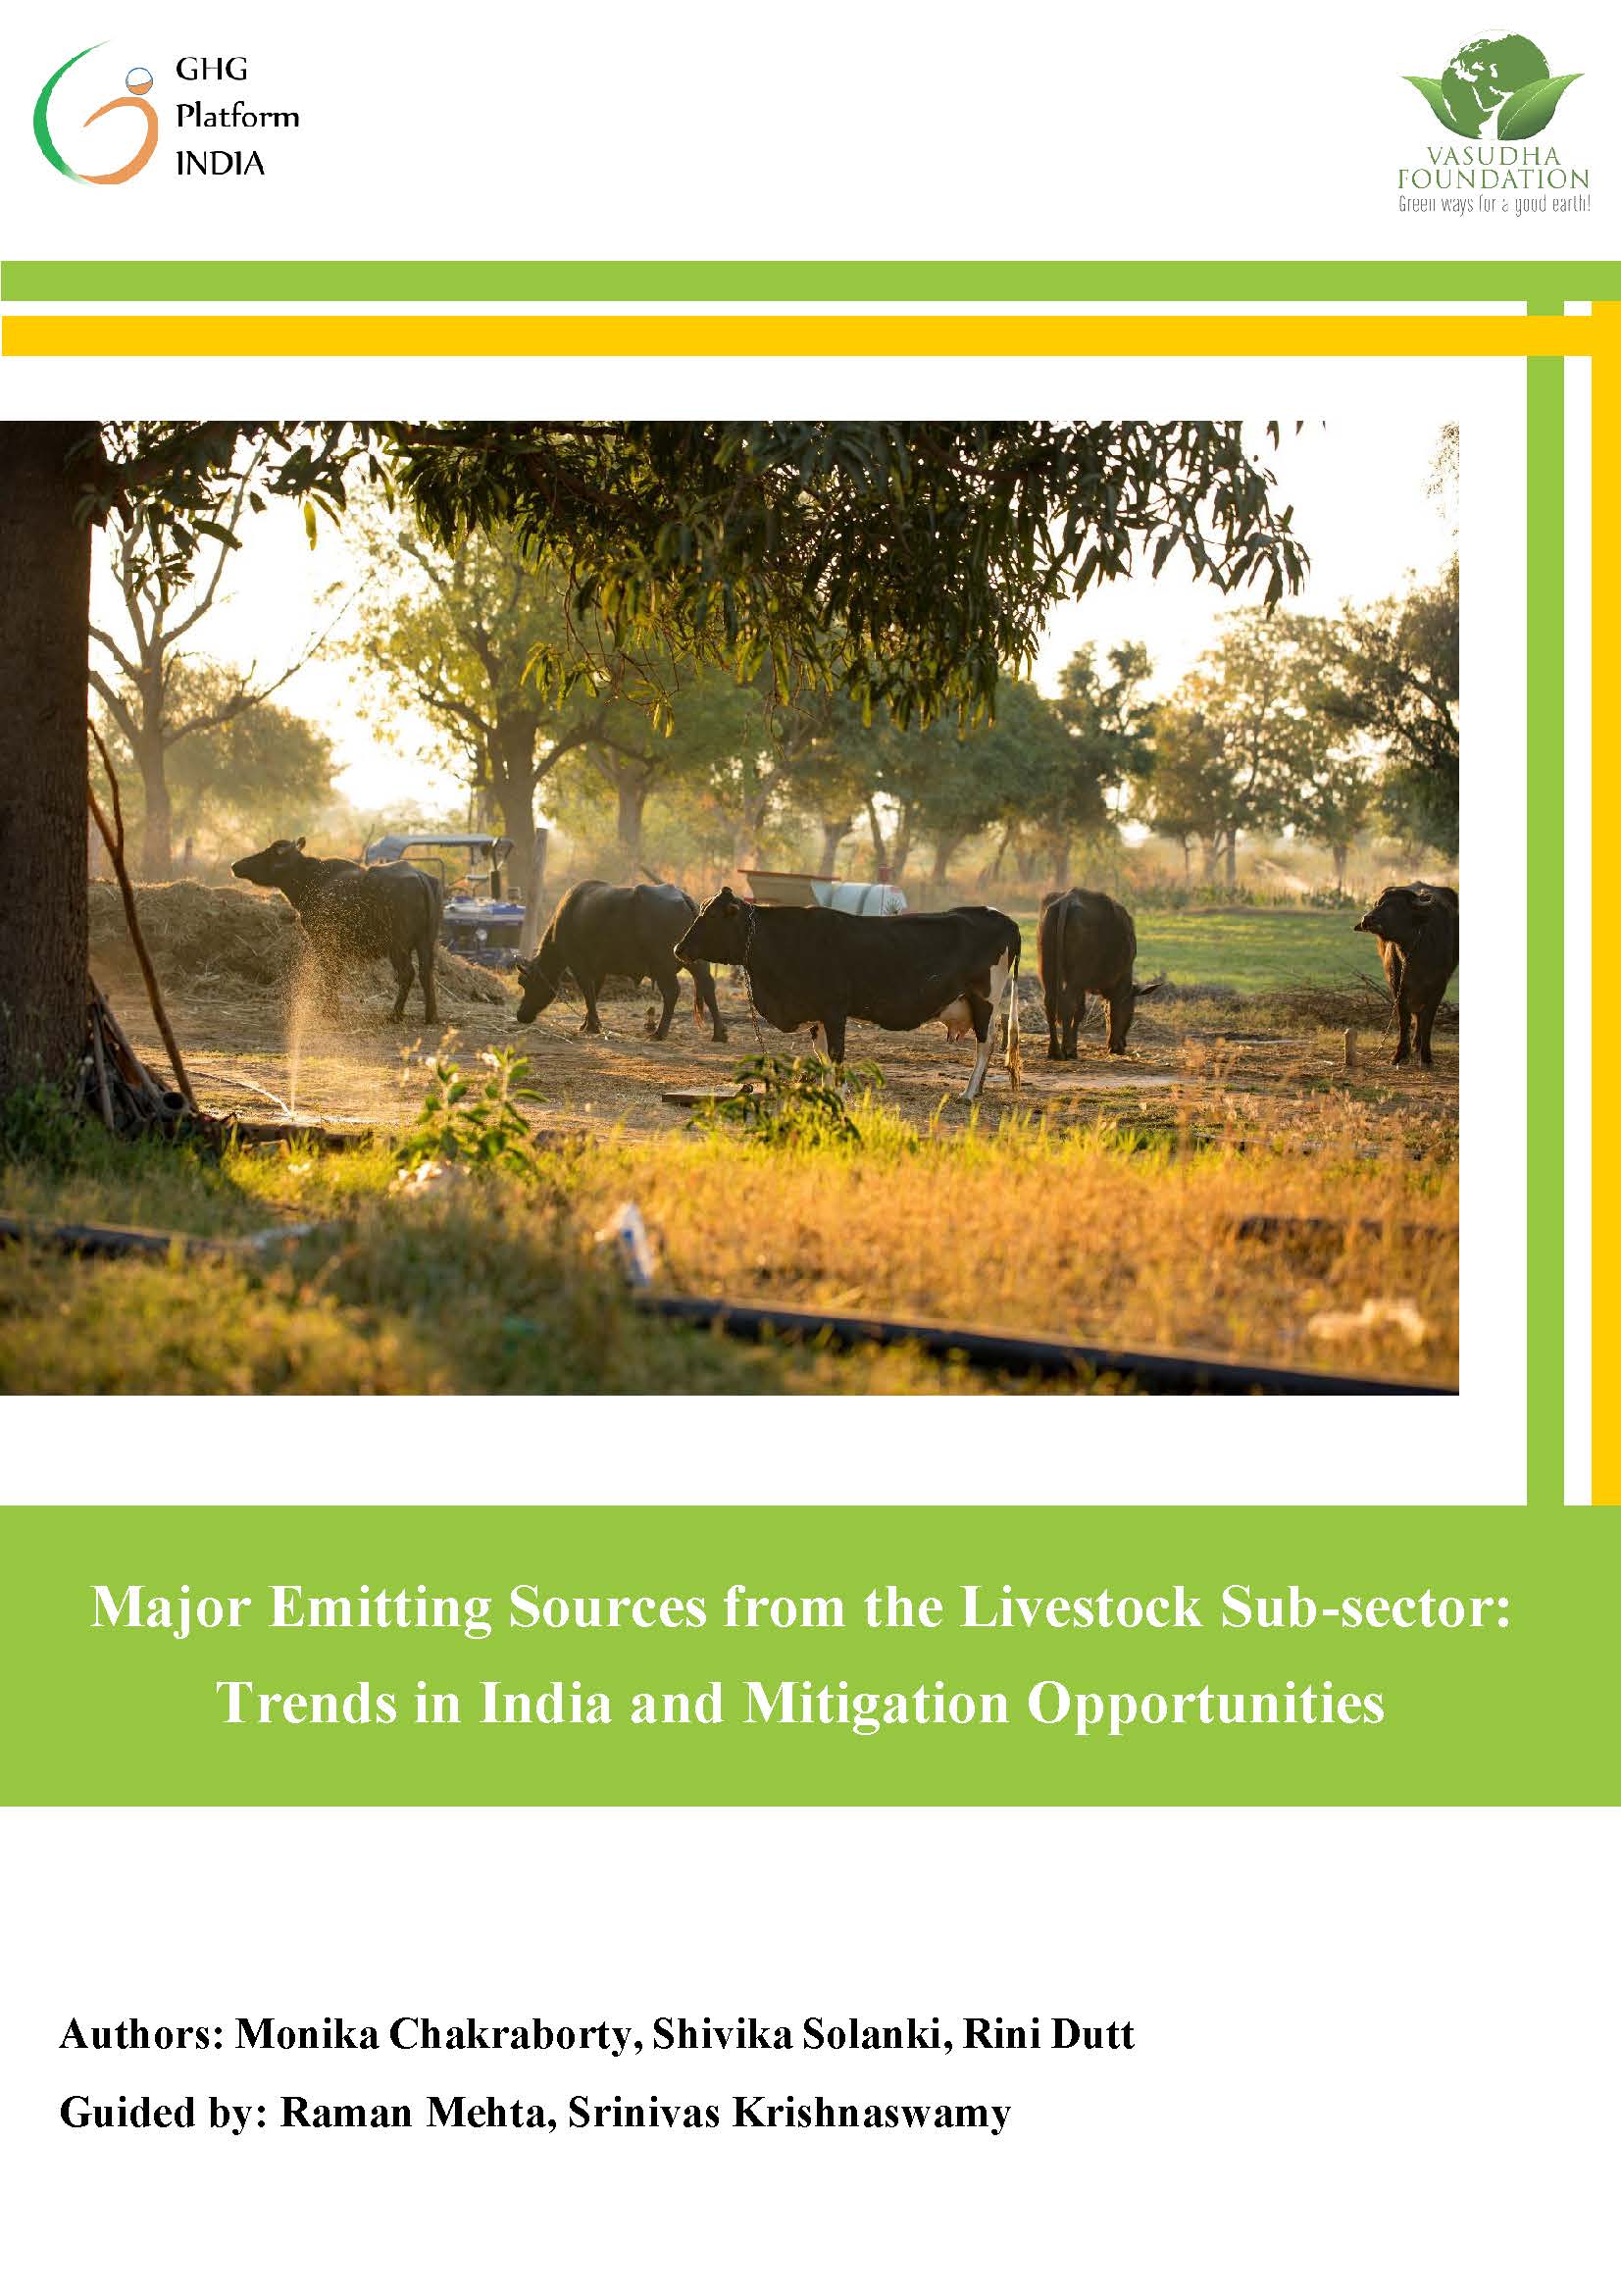 GHGPI-PhaseIV-Briefing Paper on Major Emitting Sources from the Livestock Sub-sector-Vasudha Foundation-Sep22